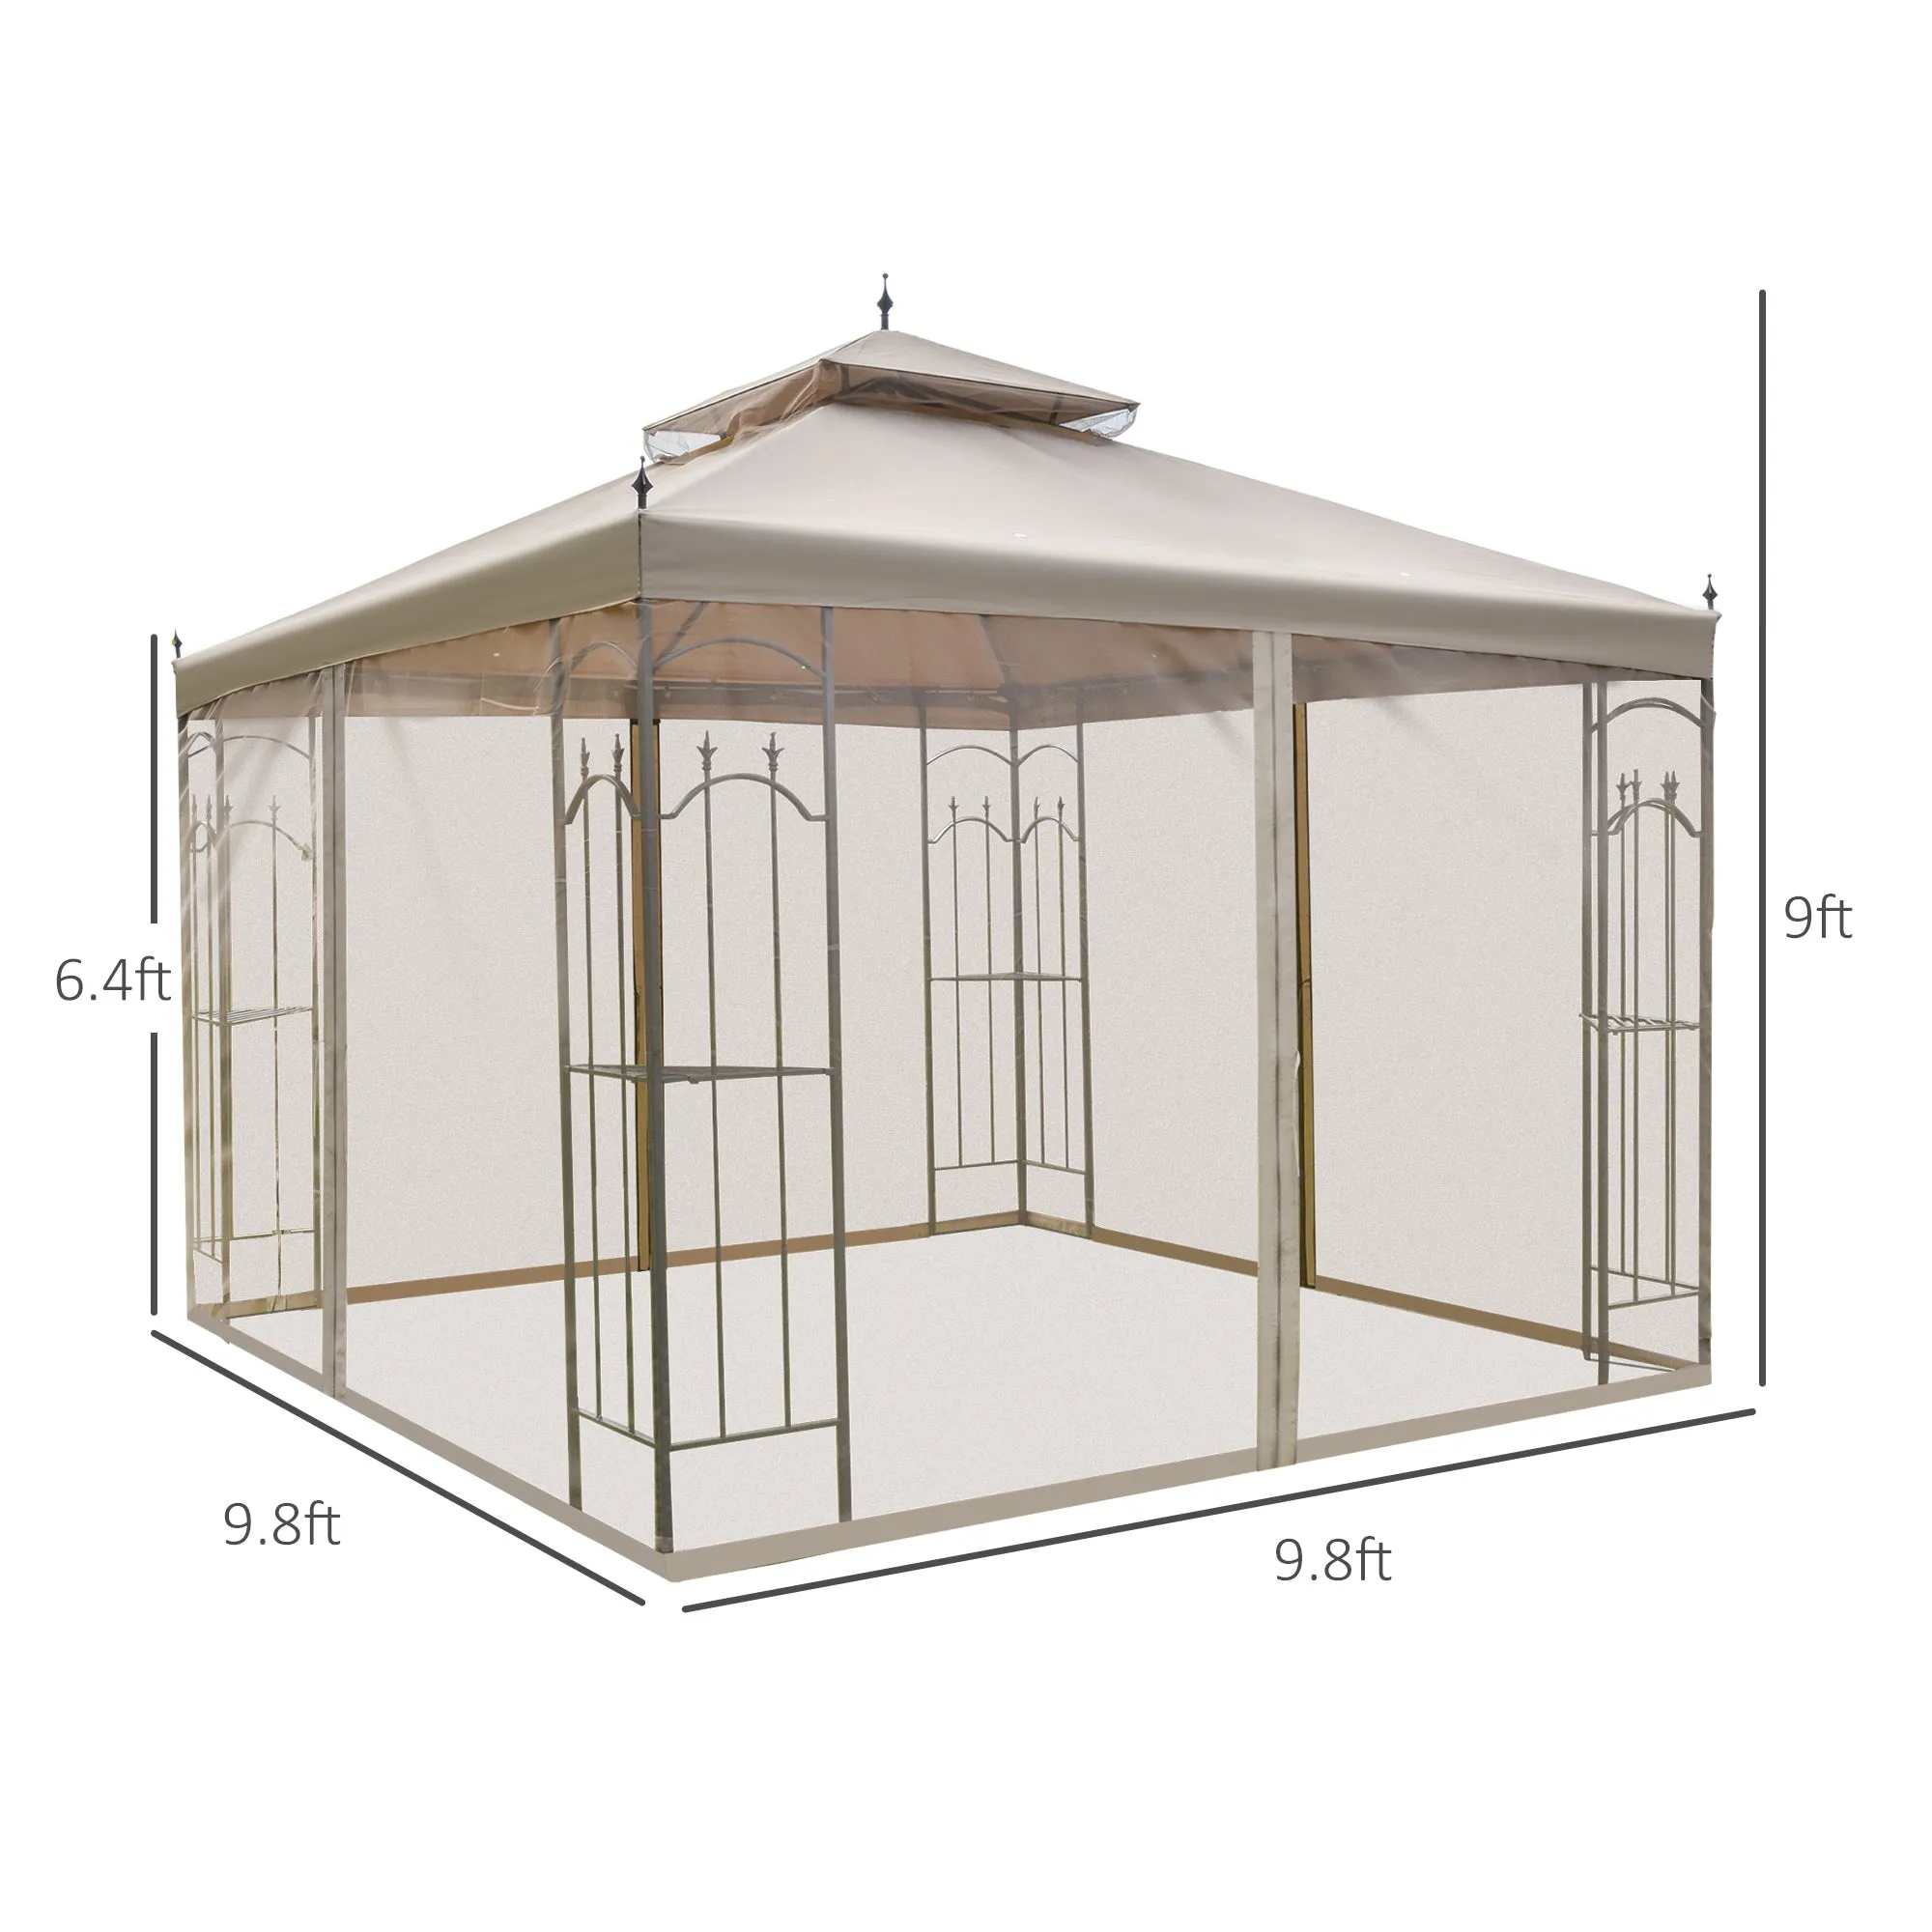 10' x 10' Steel Outdoor Patio Gazebo Canopy with Removable Mesh Curtains, Display Shelves, & Steel Frame, Brown